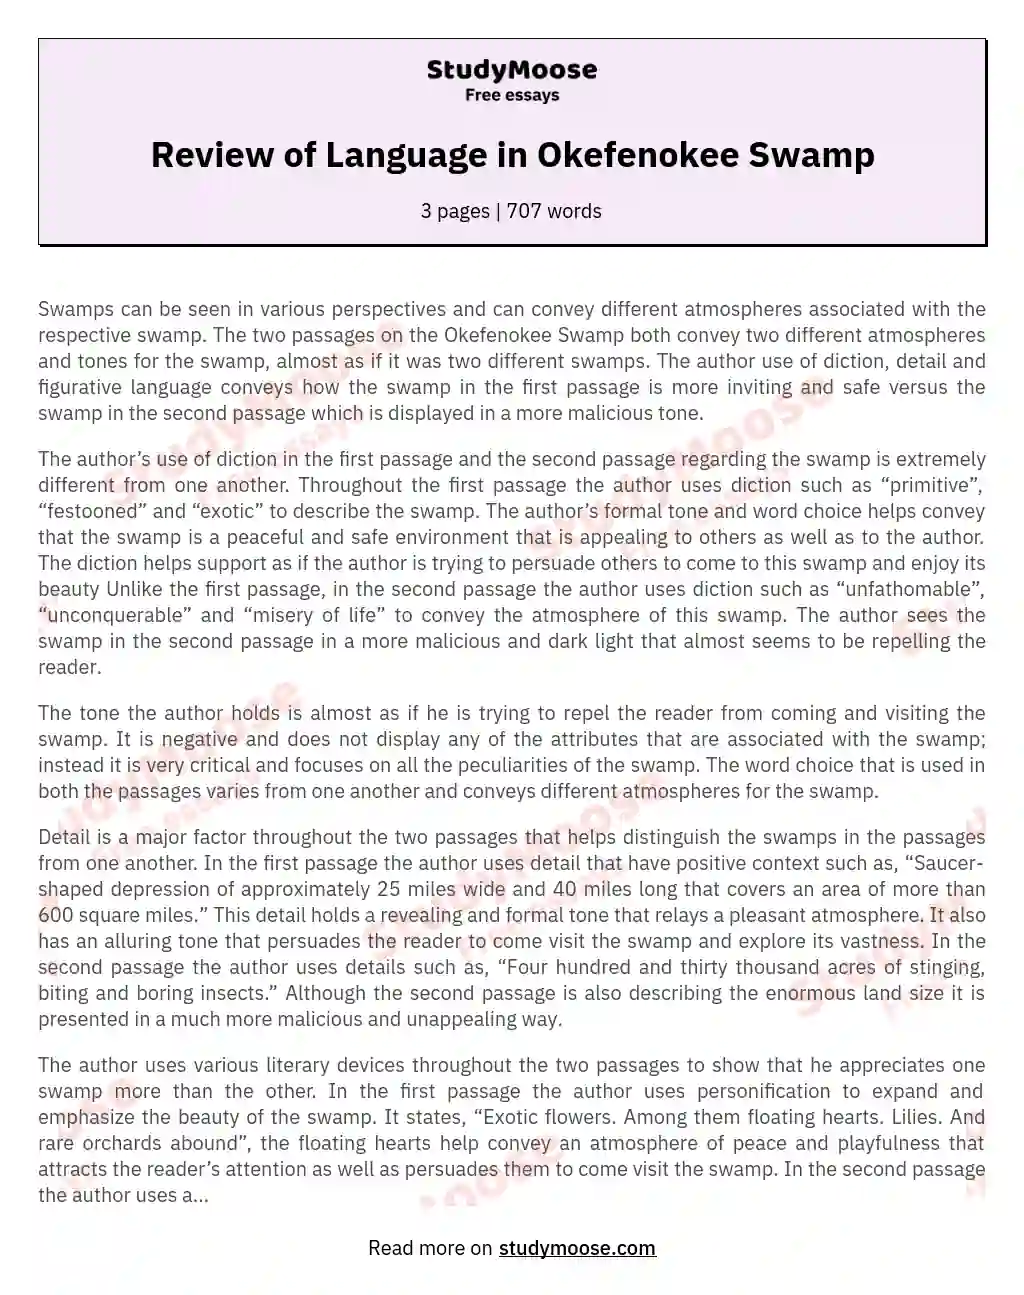 Review of Language in Okefenokee Swamp essay